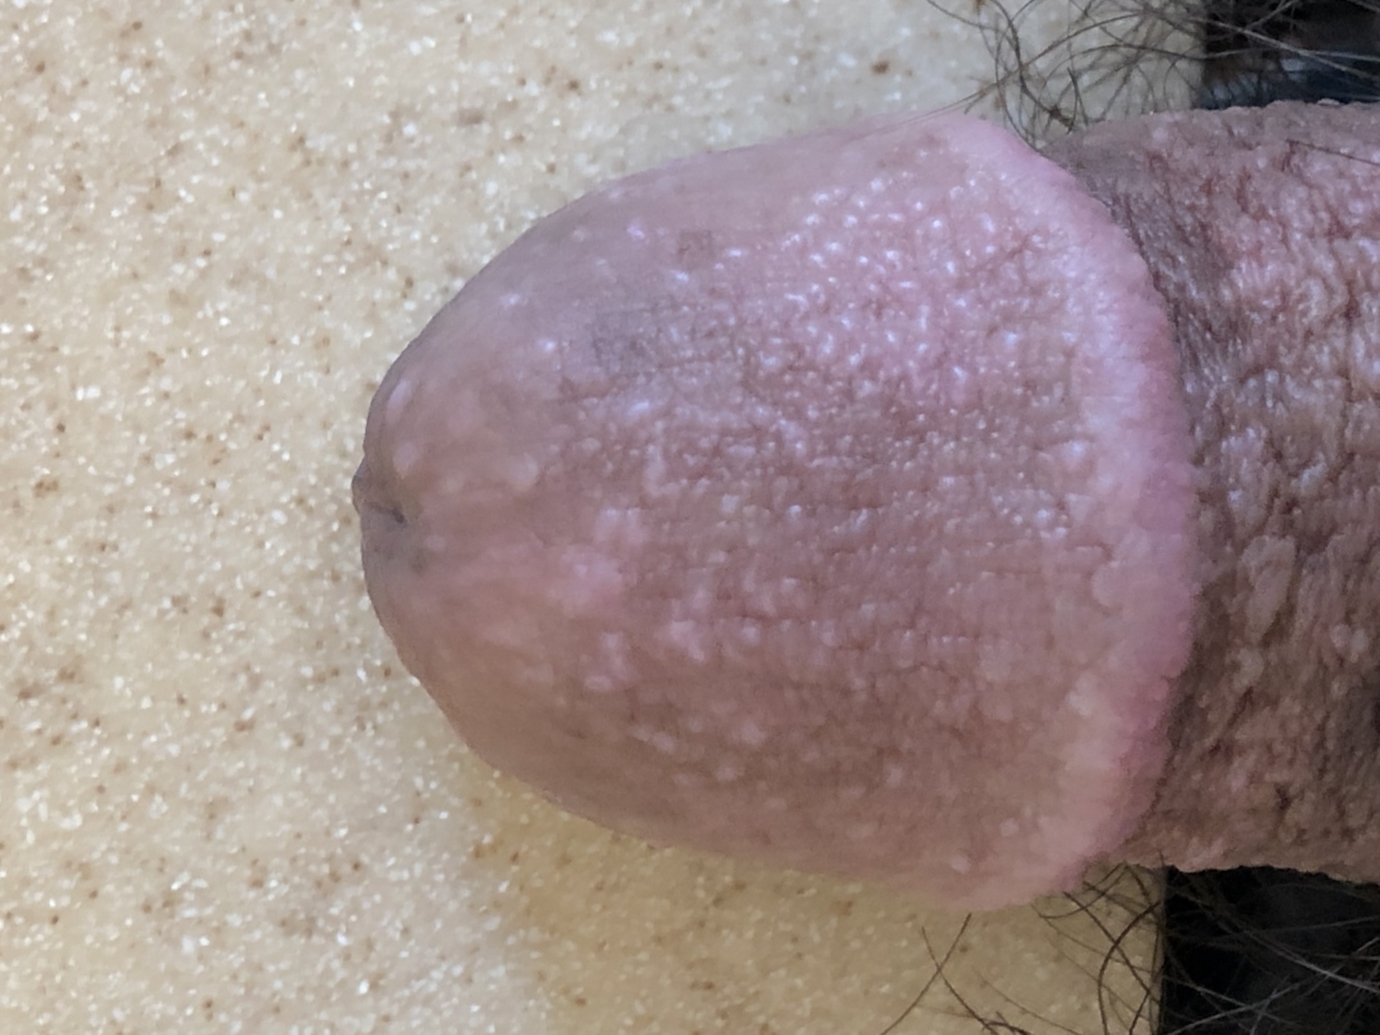 Sometimes red spots on penis are caused by skin diseases or conditions like...